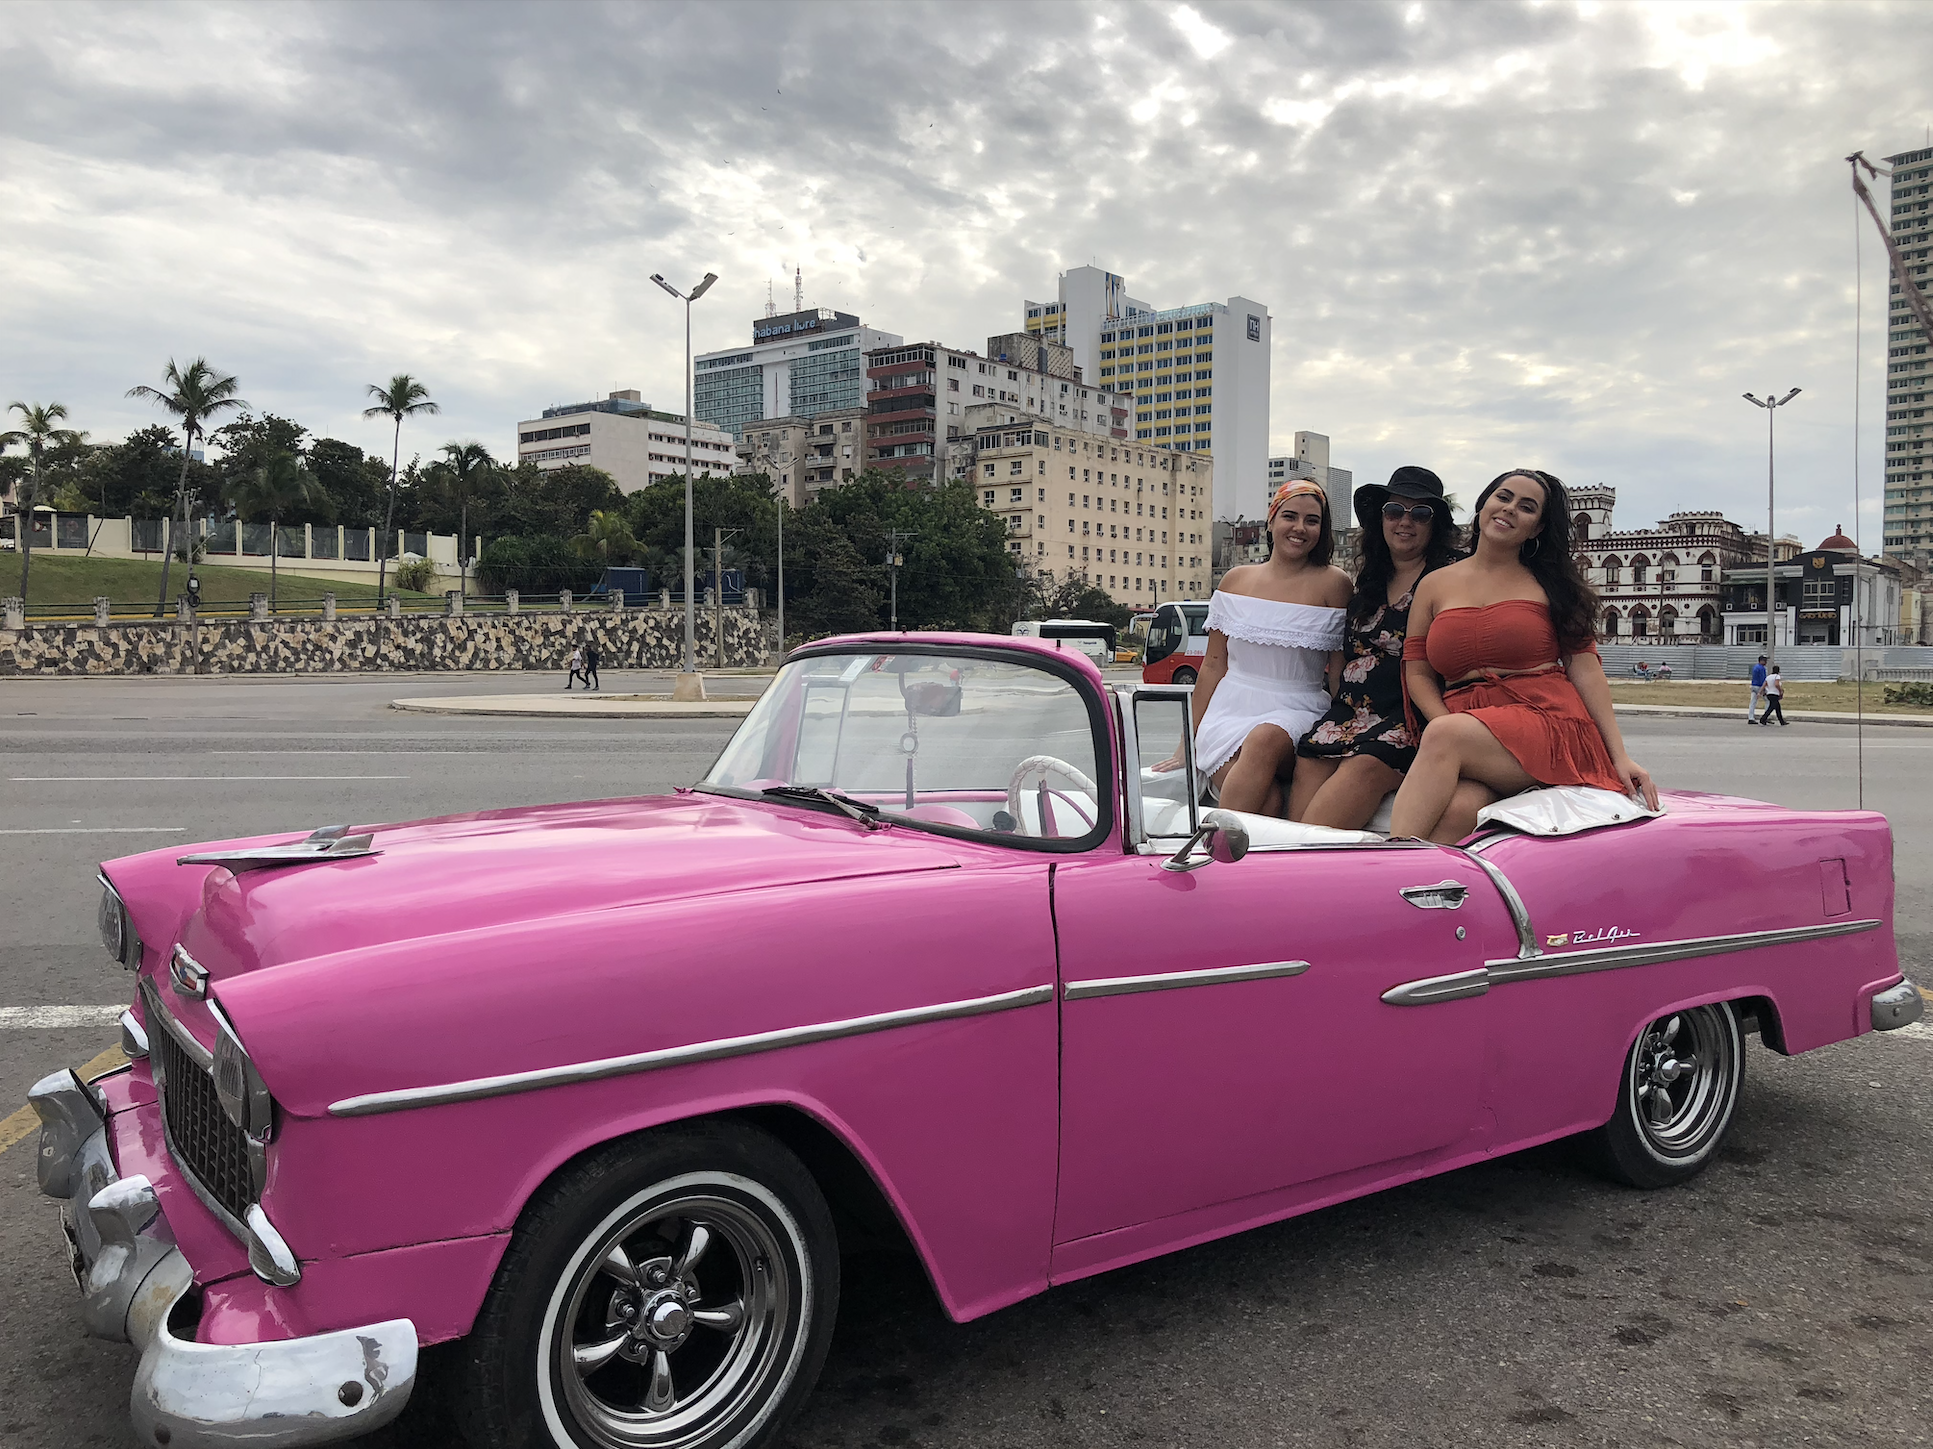 The writer and two other people sitting on the truck of a pink old-fashioned car in a city with palm trees